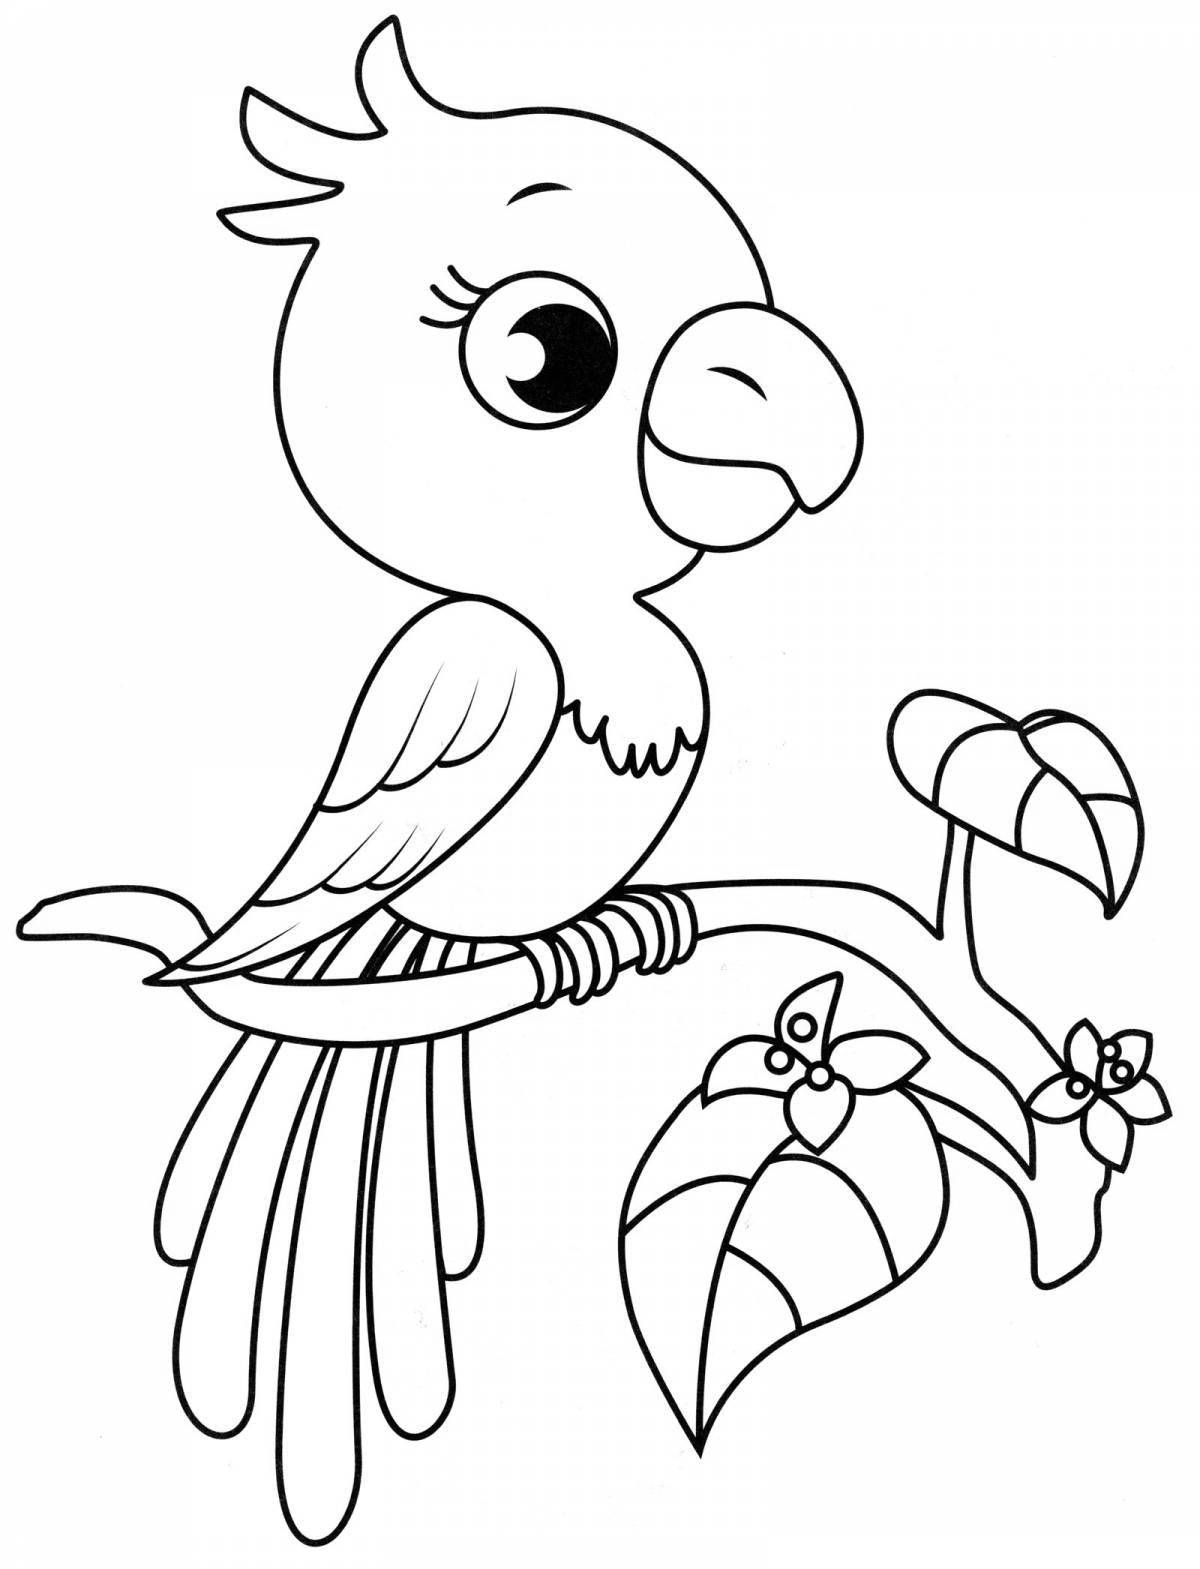 Great bird coloring book for 4-5 year olds